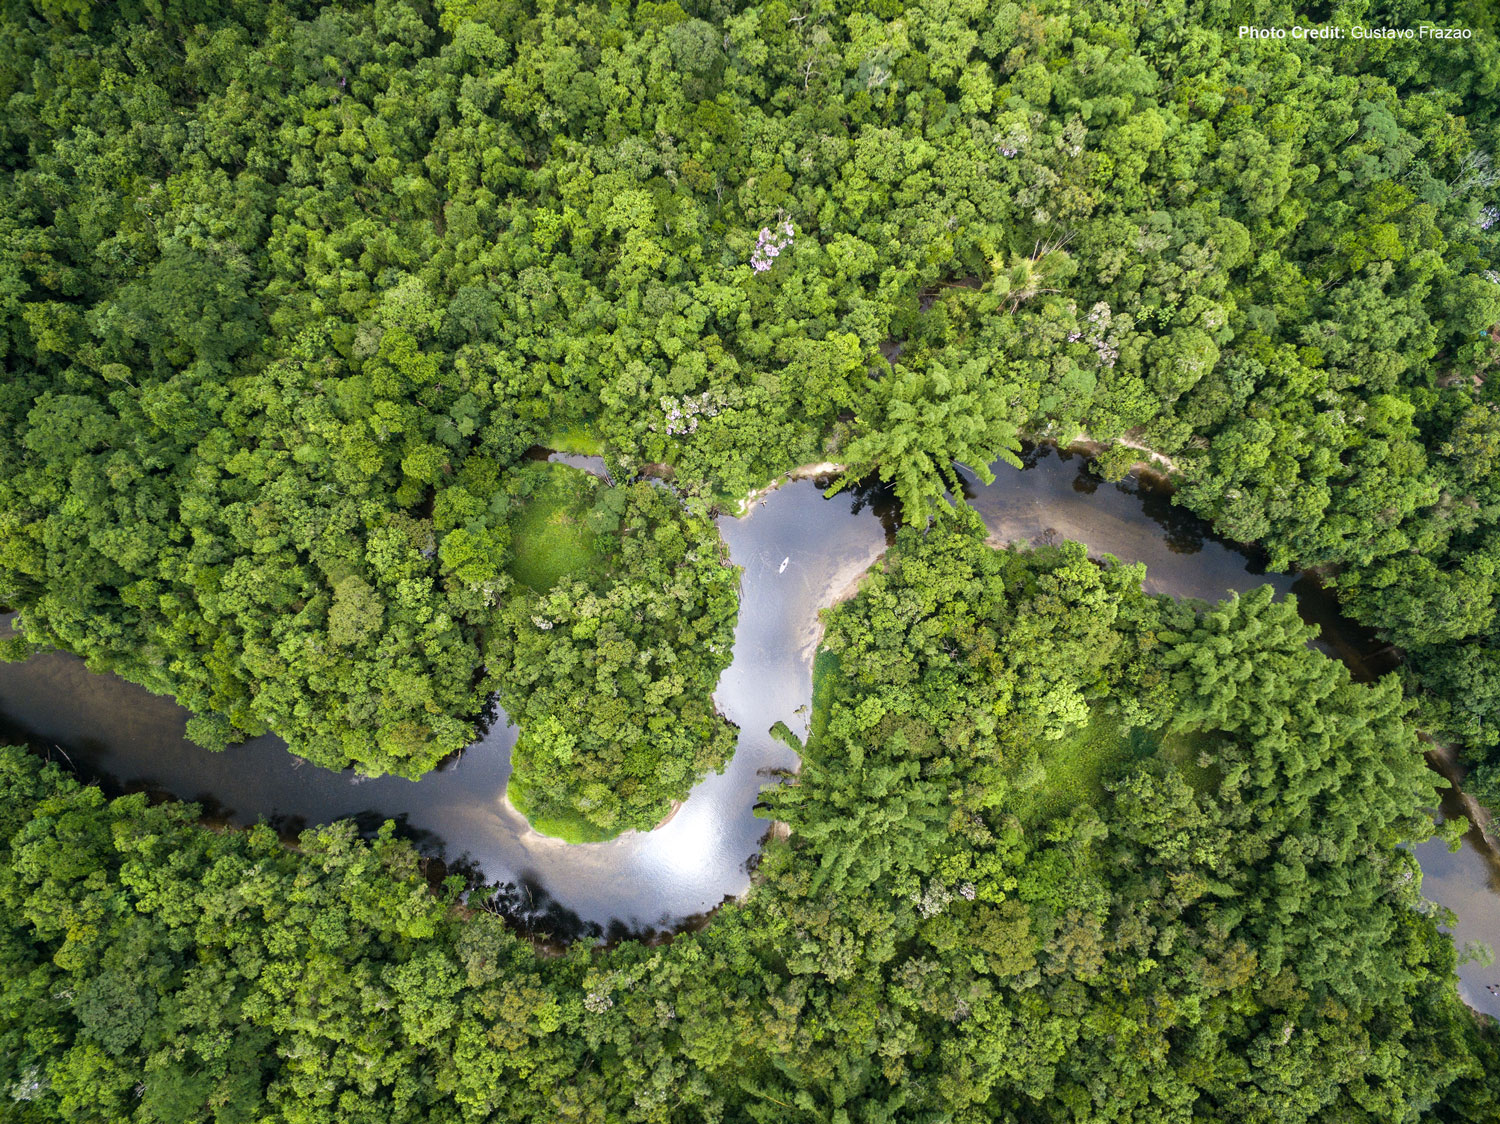 Amazon rainforest from an aerial view